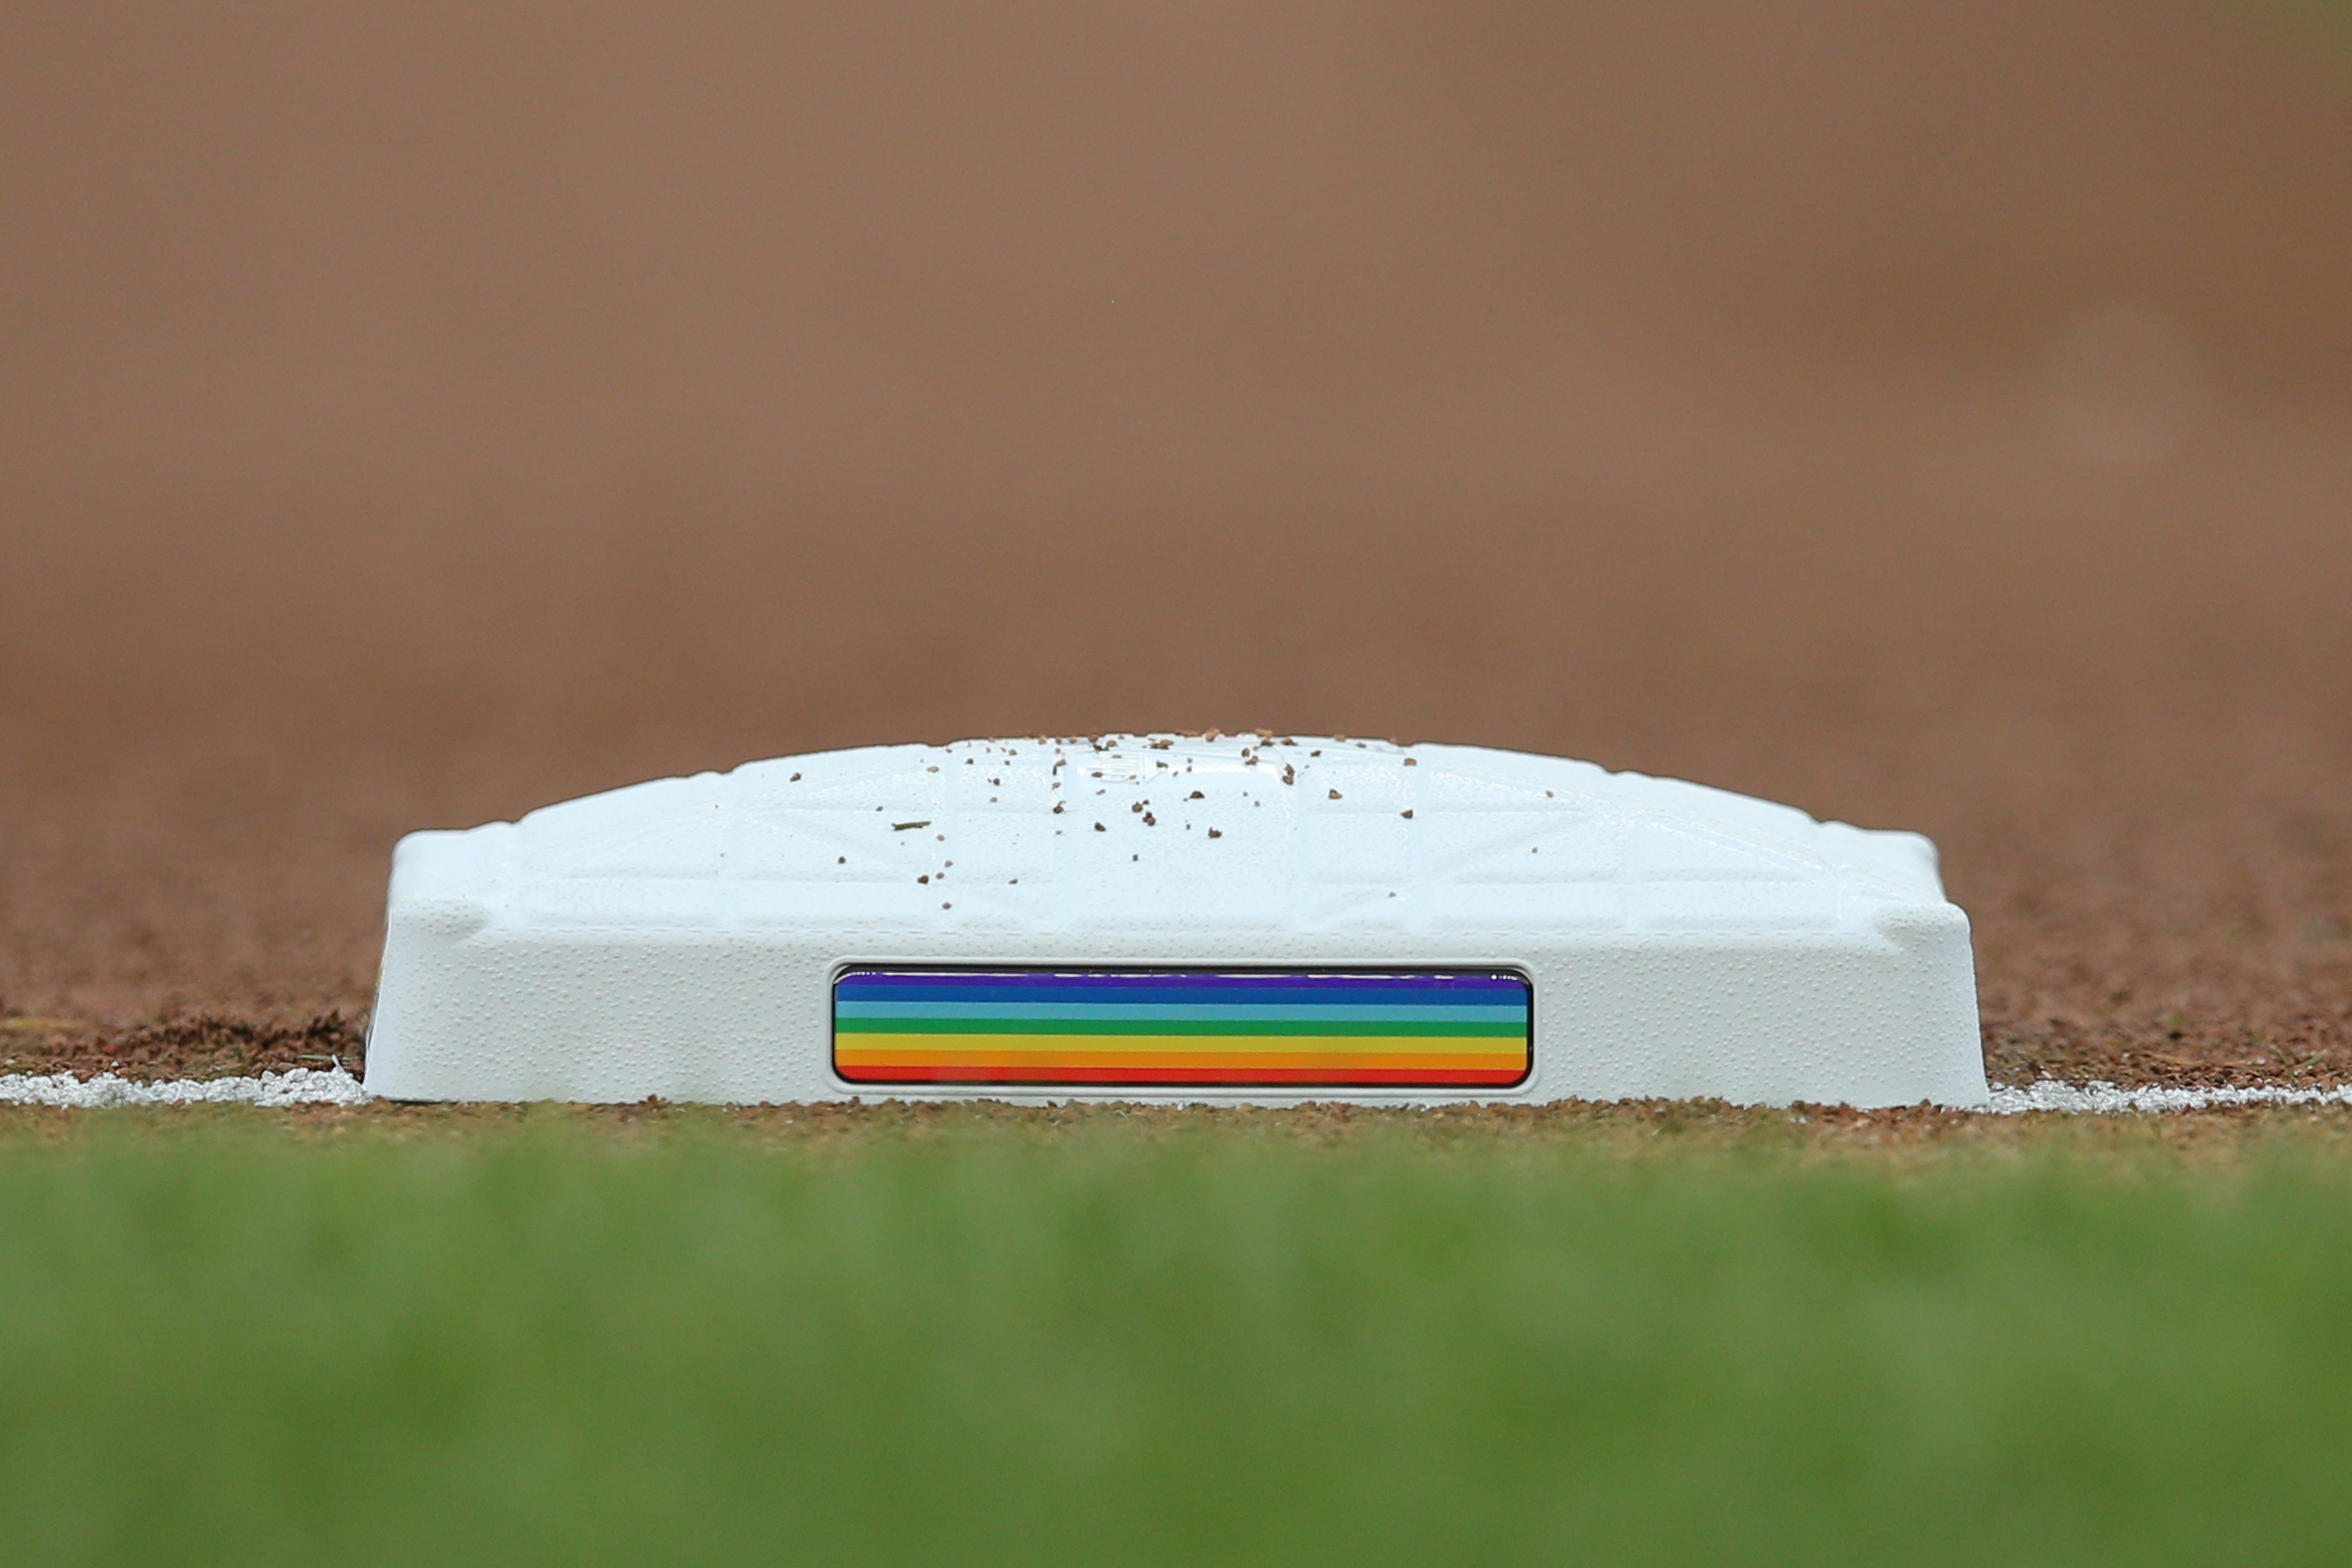 Baltimore Orioles Twitter was the perfect LGBTQ Pride Night ally